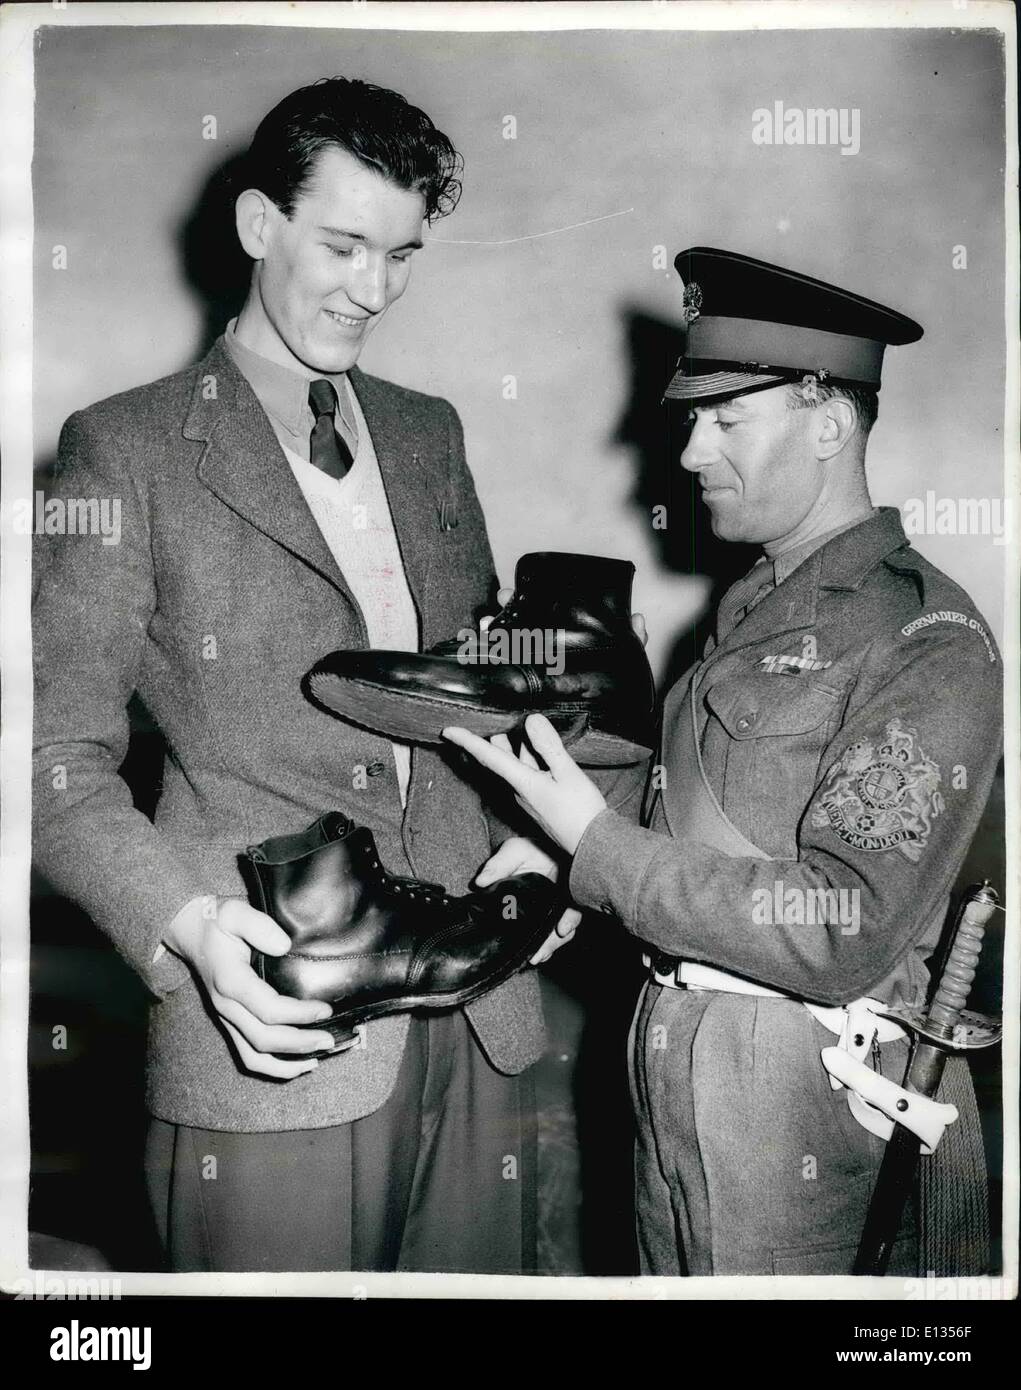 Feb. 28, 2012 - Tallest recruit brings his own boots. Robert waits for his ''issue'' to be made-to-measure.: Believed to be the Stock Photo